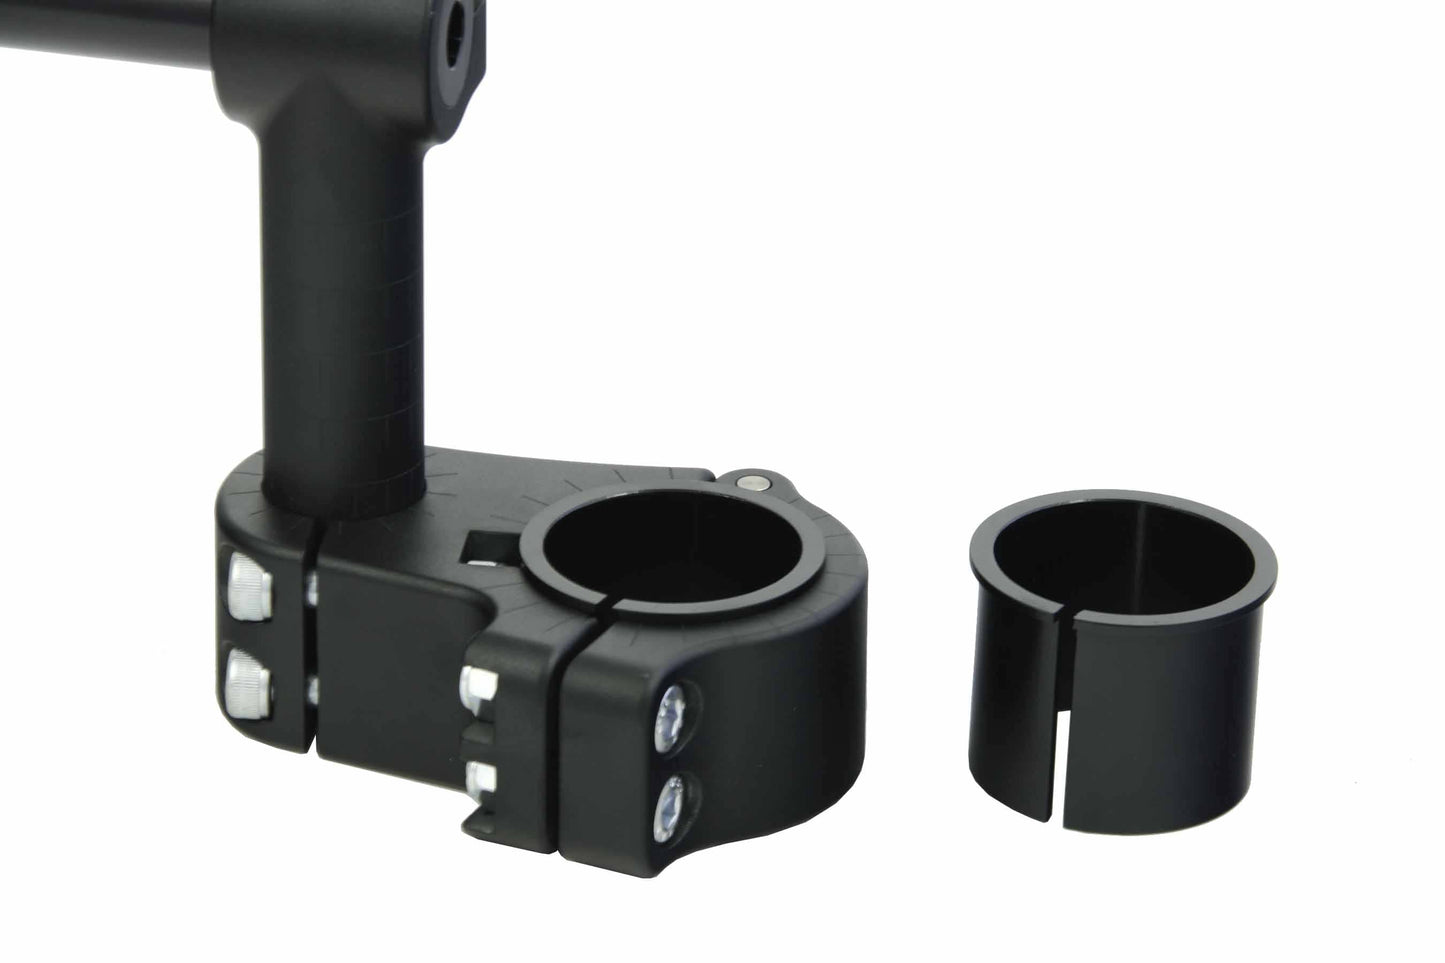 OnPoint Riser Clip-on Set with 7/8" Bar